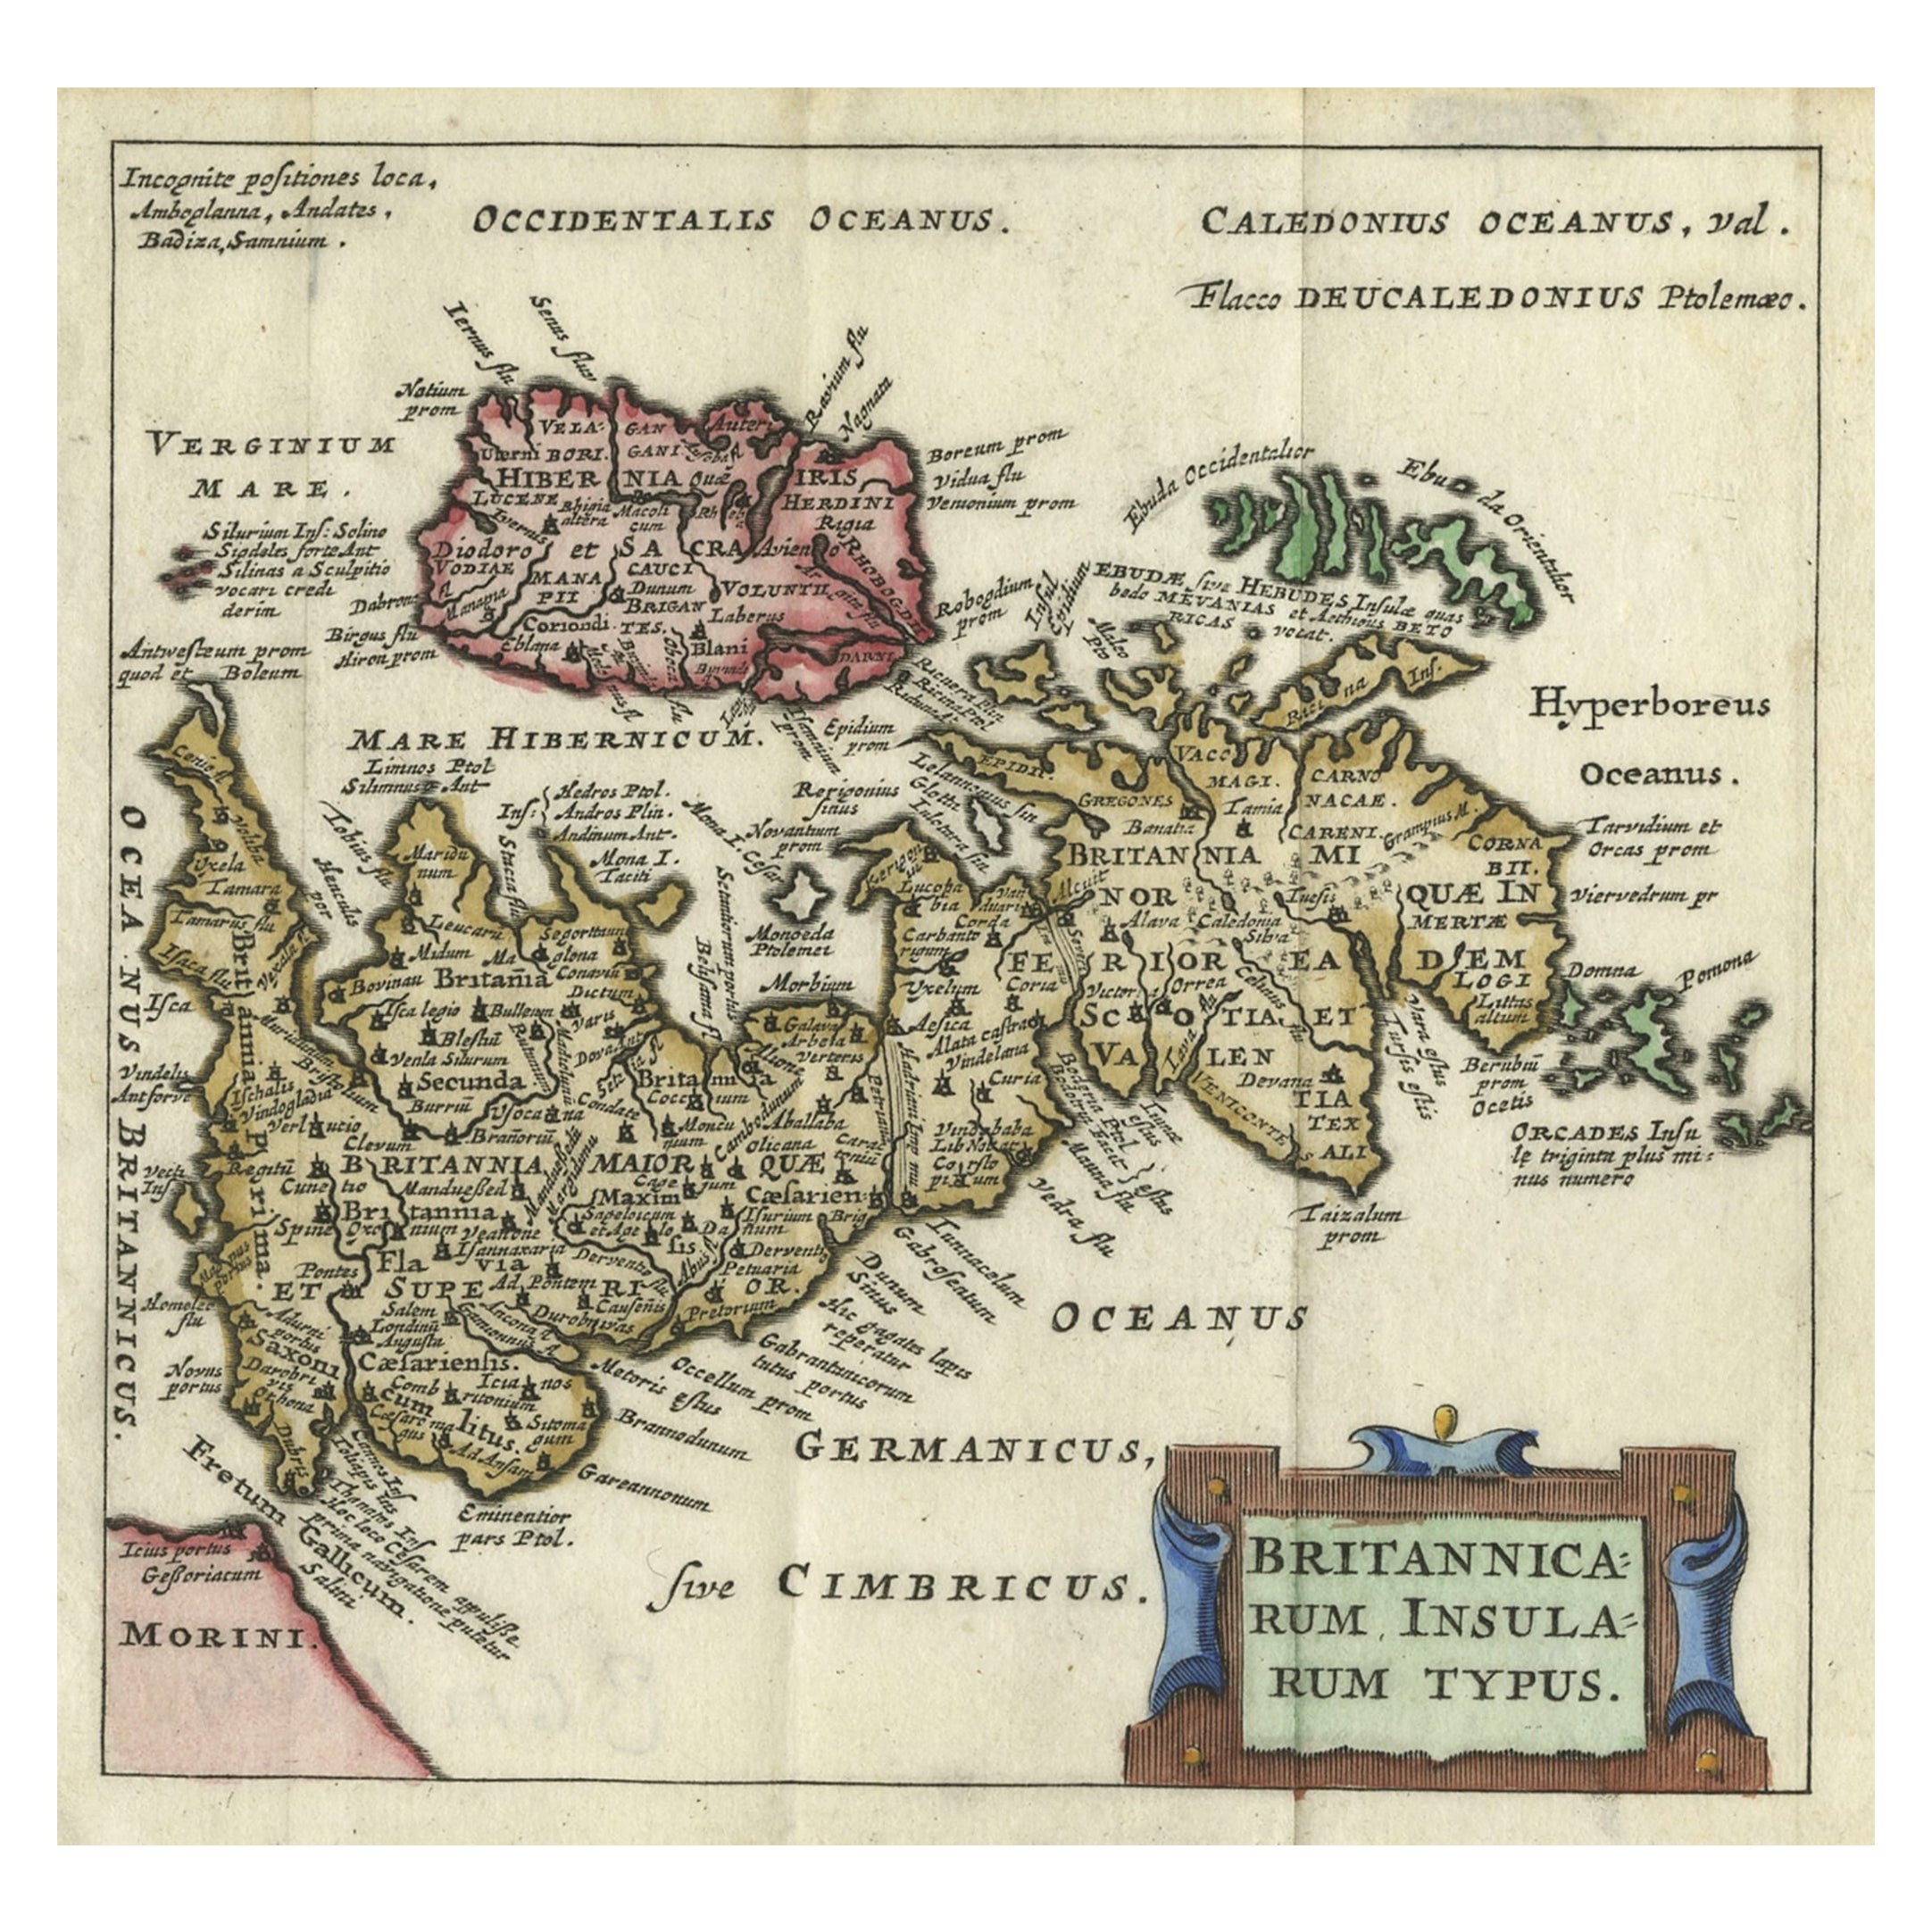 Charming Rare Miniature Map, The British Islands from an Old Pocket Atlas, 1685